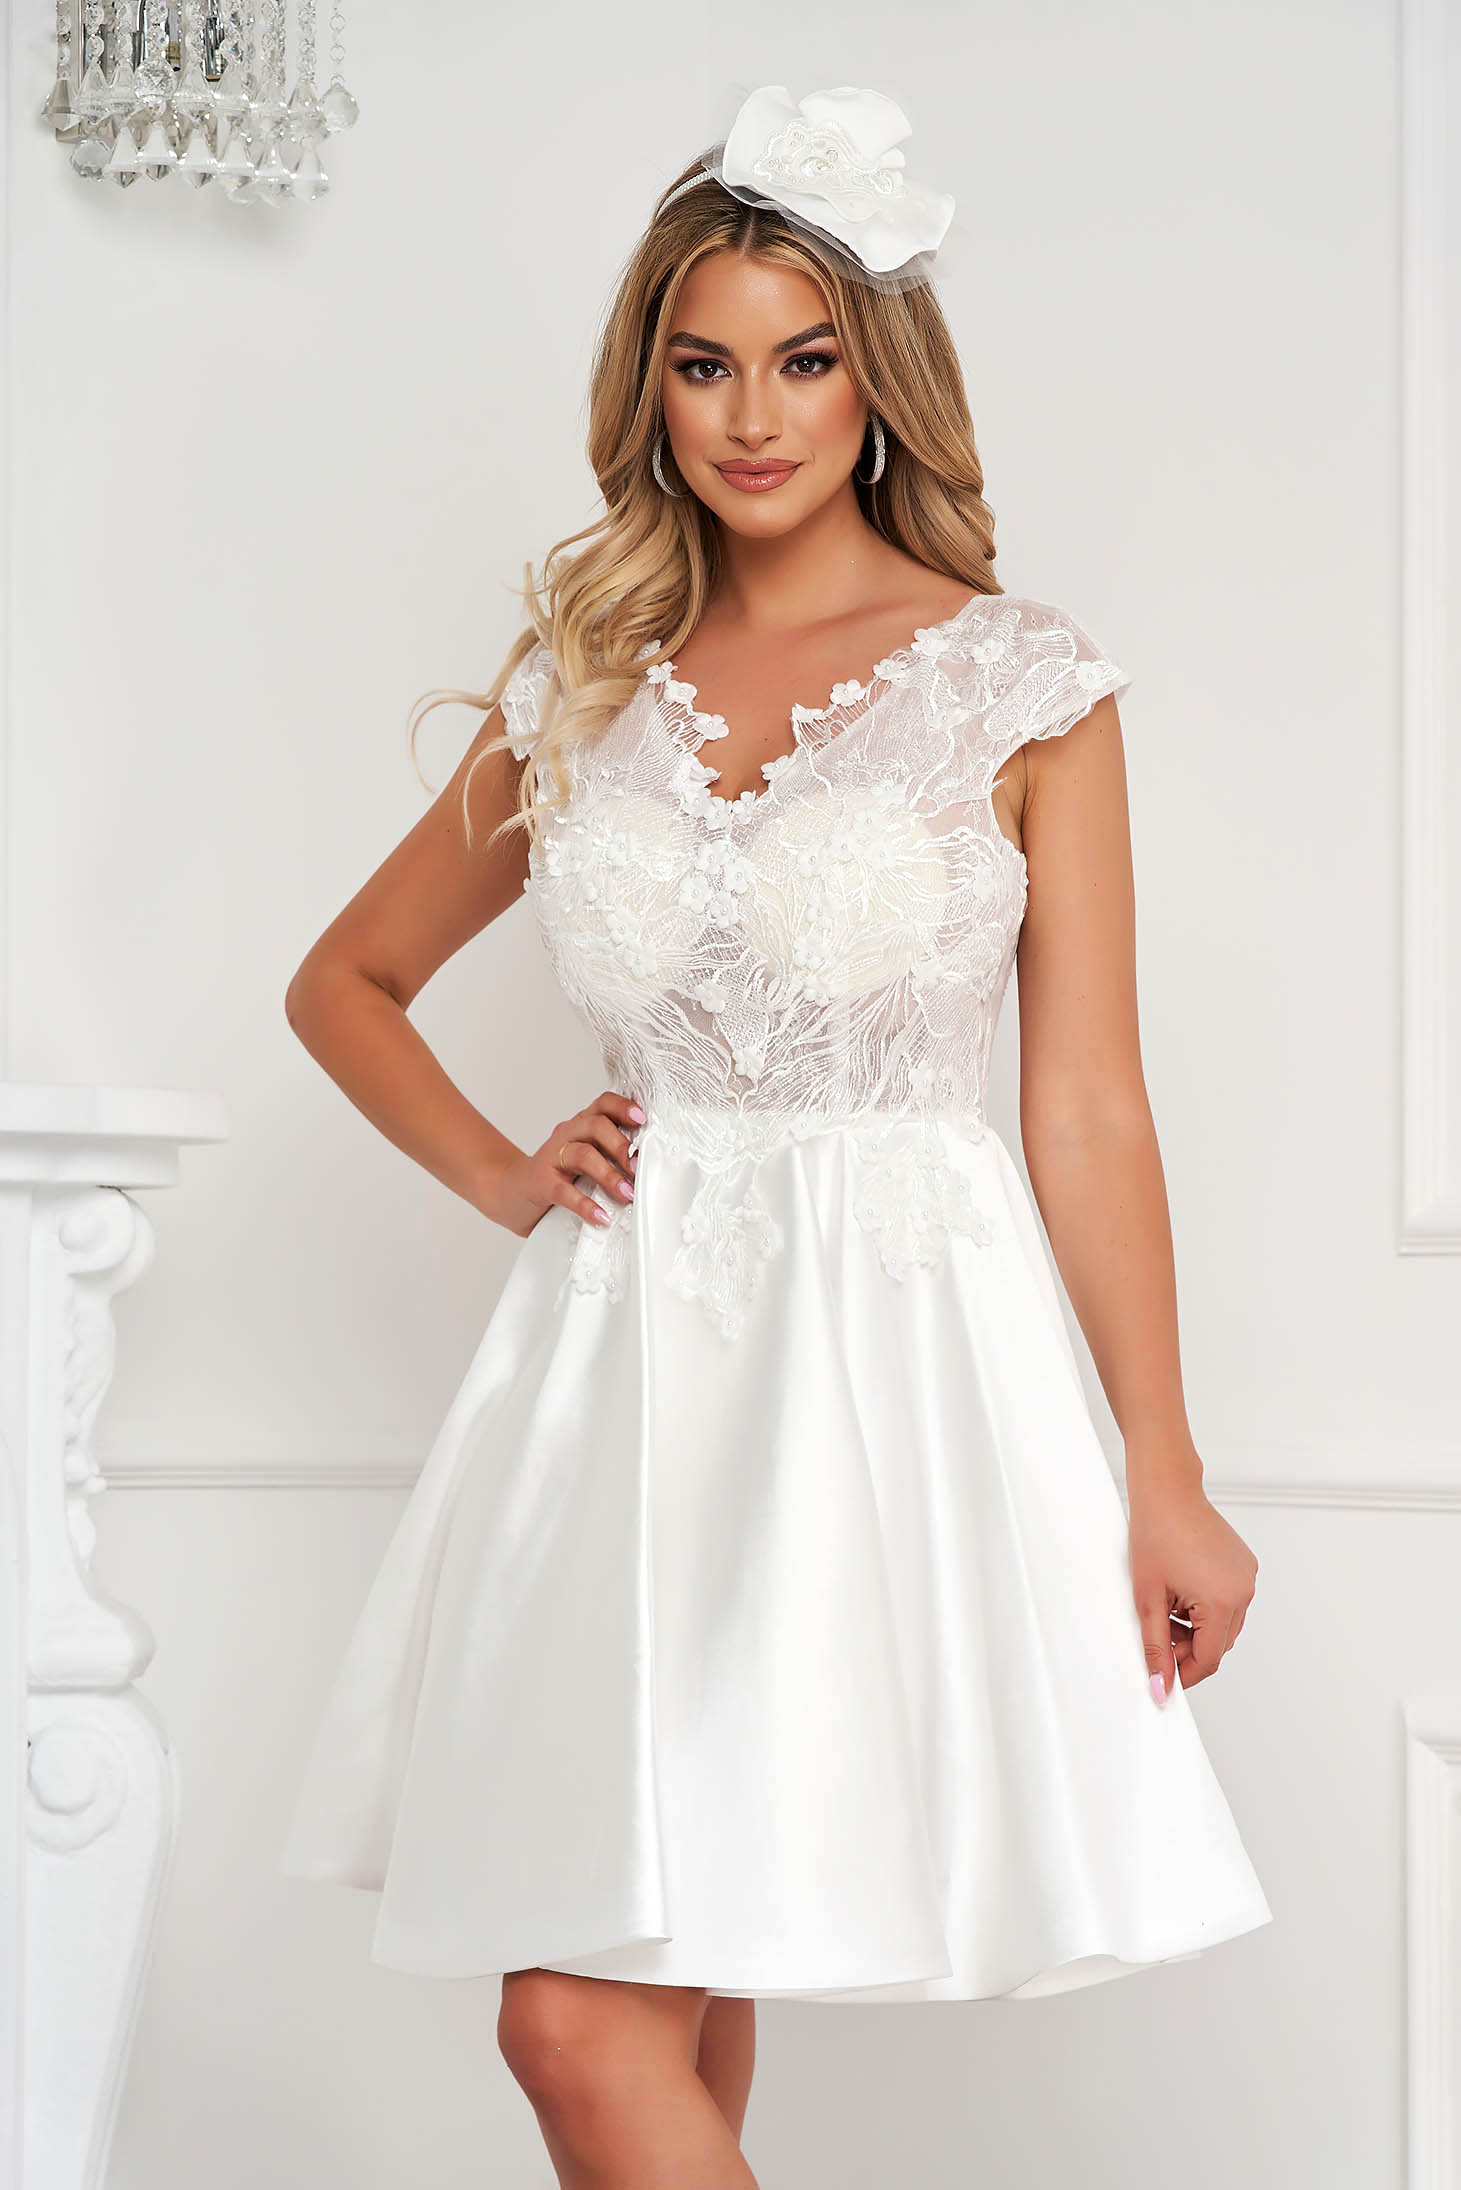 White dress short cut occasional laced from satin fabric texture cloche